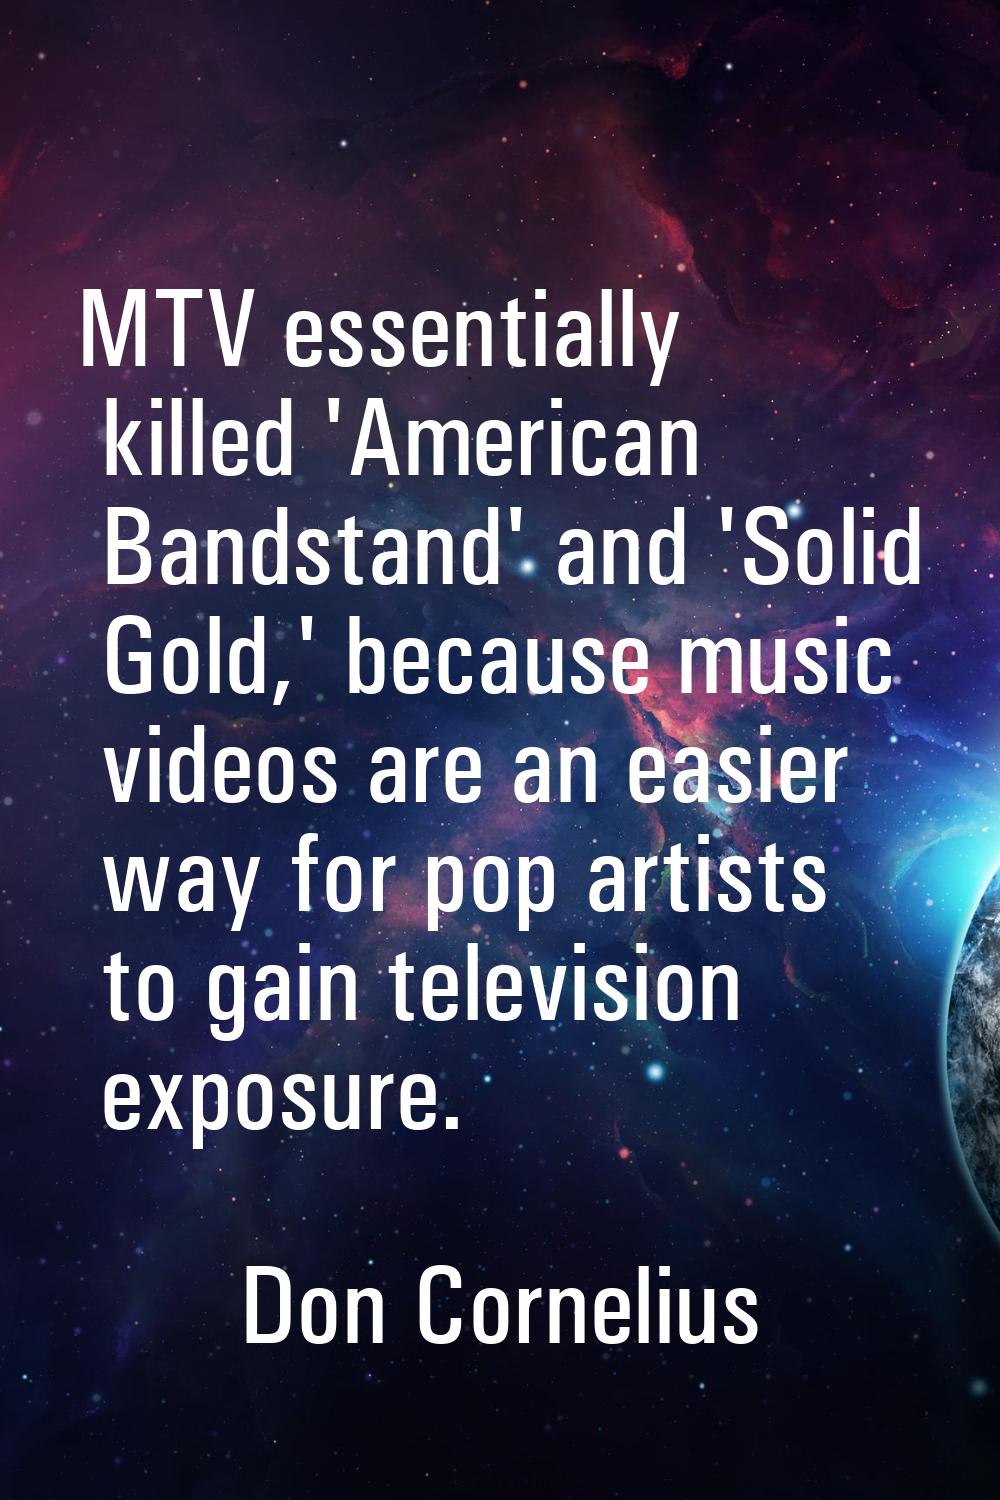 MTV essentially killed 'American Bandstand' and 'Solid Gold,' because music videos are an easier wa